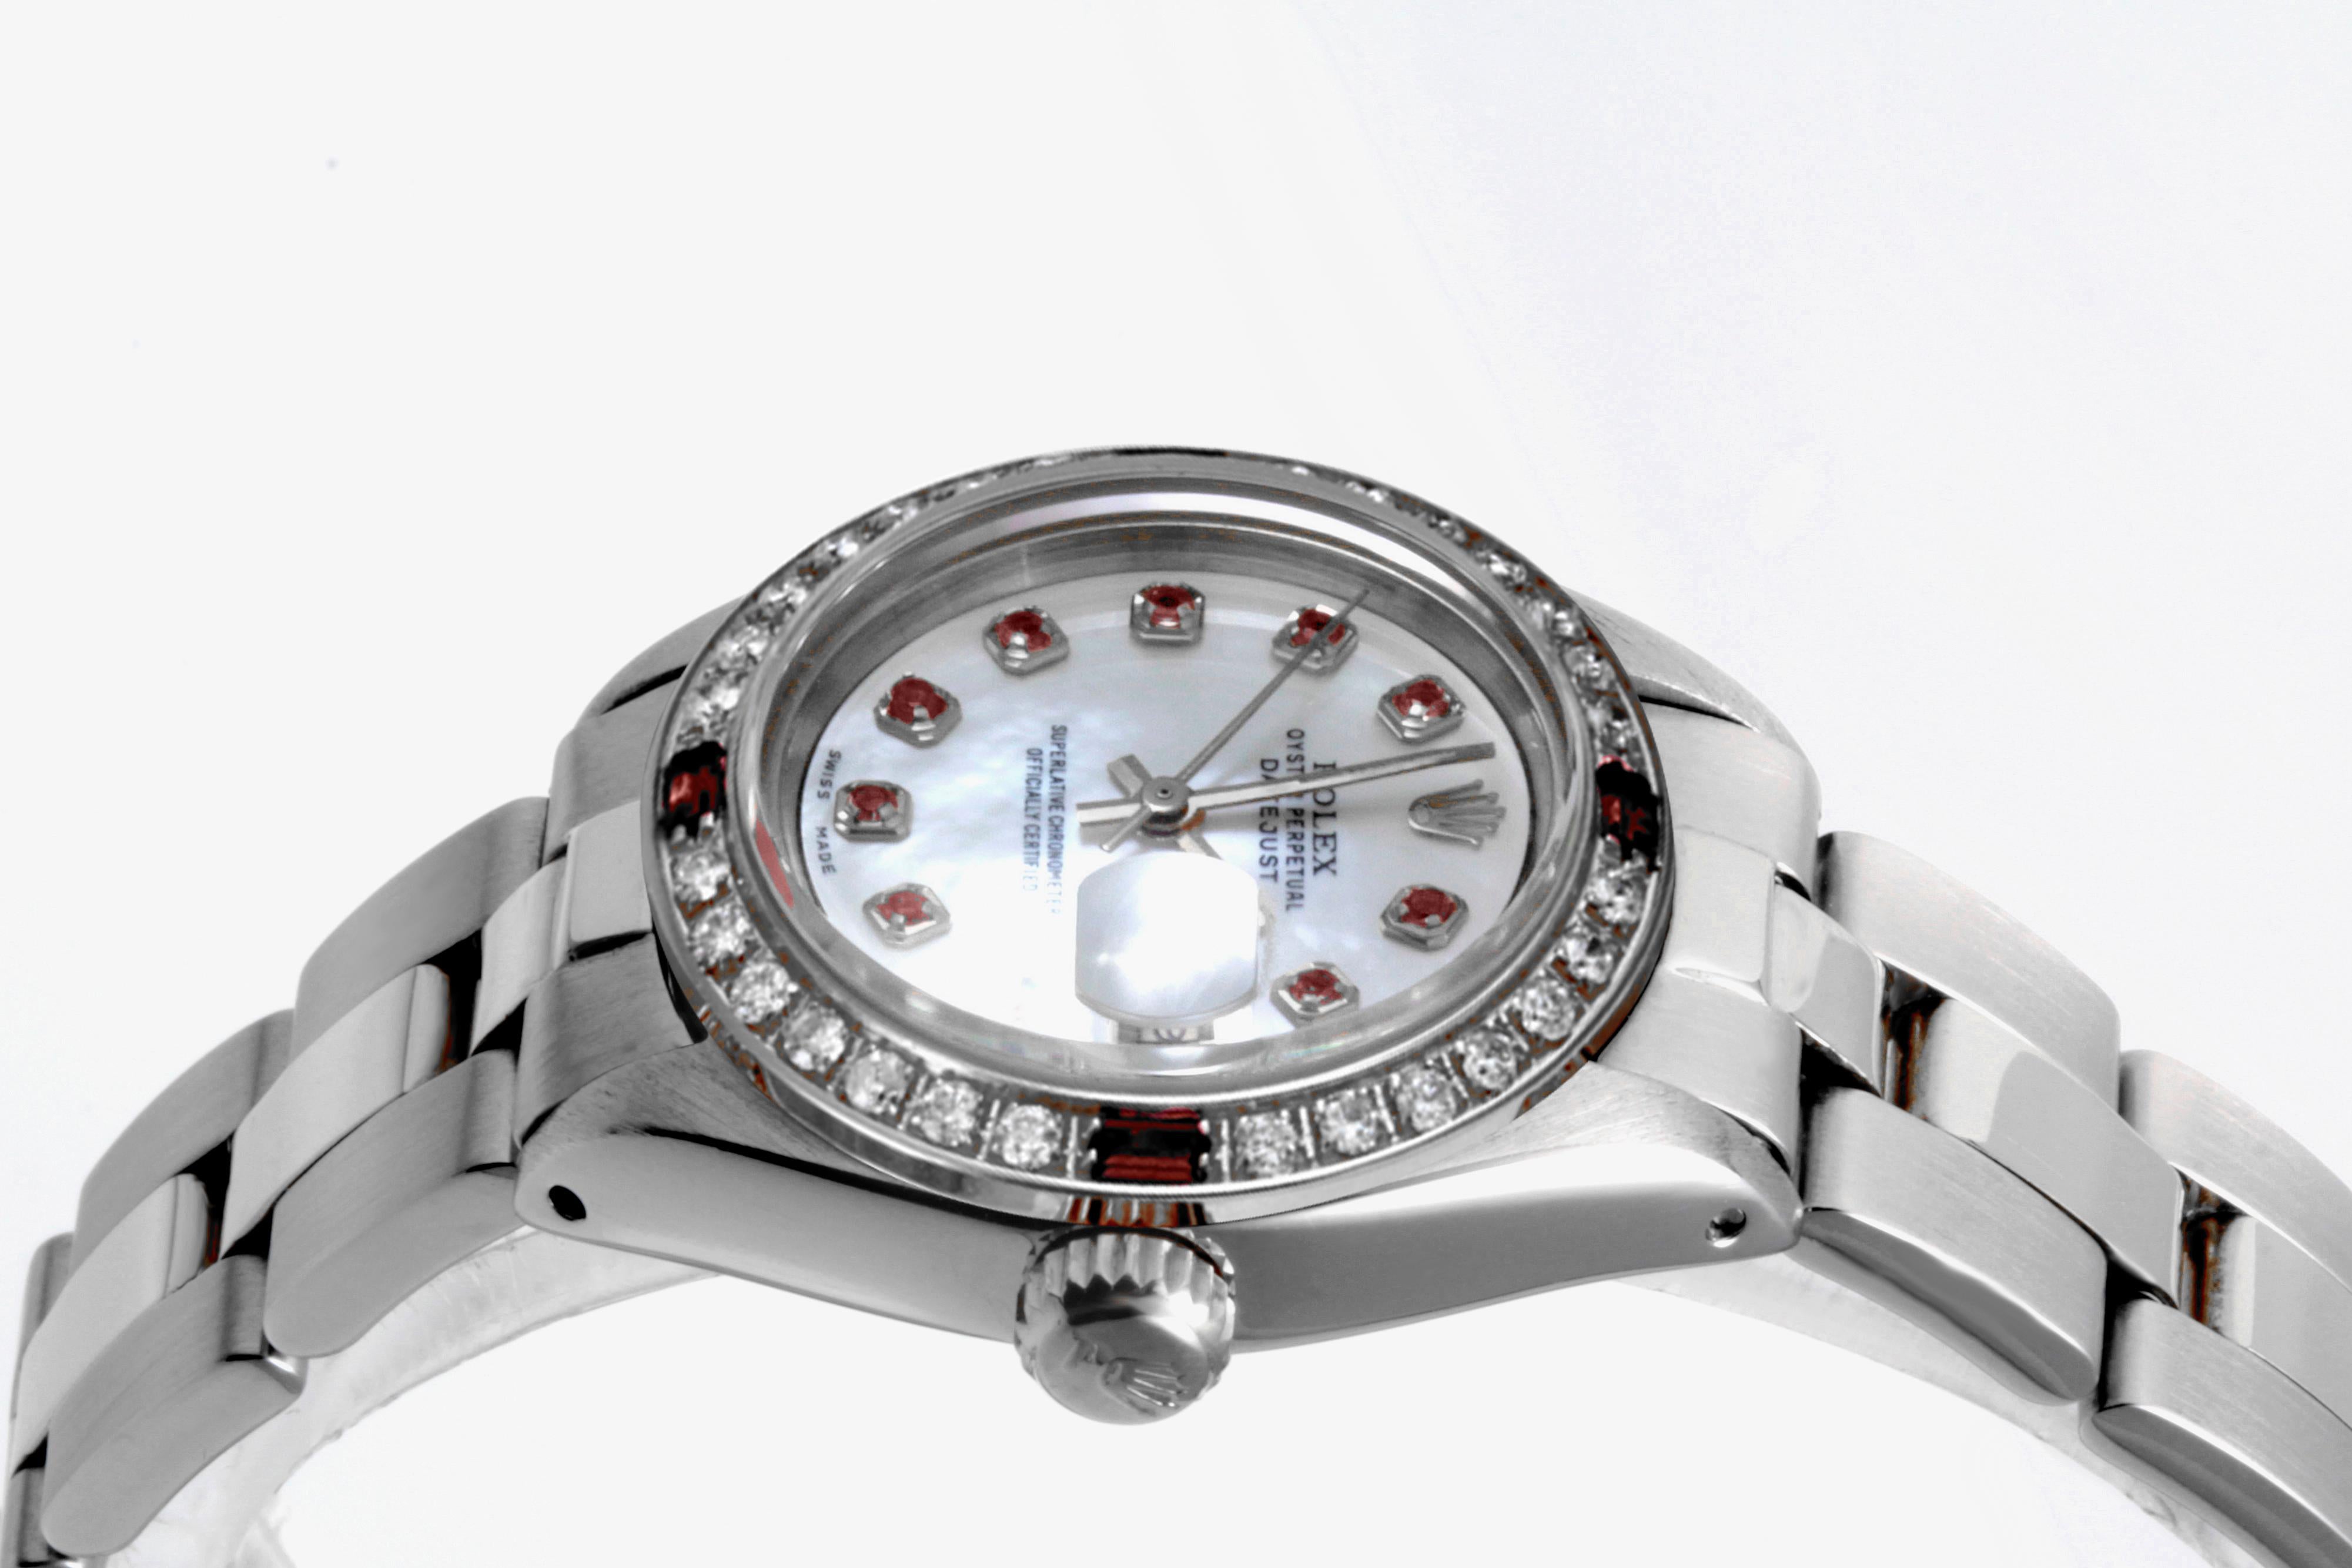 Brand - Rolex
Gender - Ladies
Model - 6919 Datejust
Metals - Stainless Steel
Case size - 26 mm
Bezel - Steel Diamond Ruby
Crystal - Sapphire
Movement - Automatic Cal.2035
Dial - Refinished MP ruby 
Wrist band - Steel Oyster
Wrist size - 7 1/2 Inche